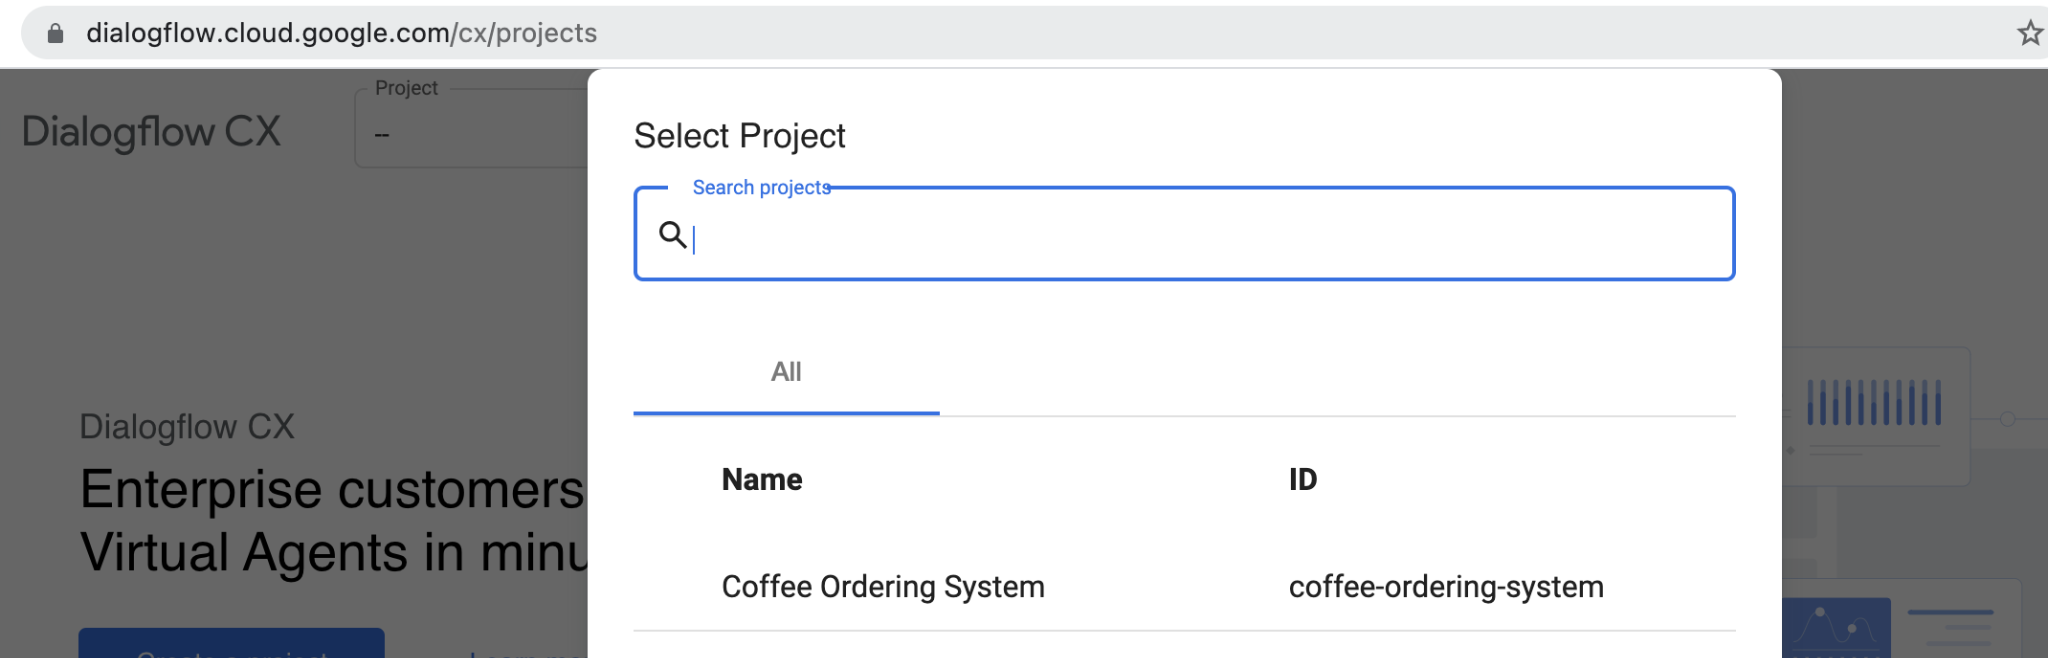 Voicebot based ordering system, Google Dialogflow, NLP, New Project created